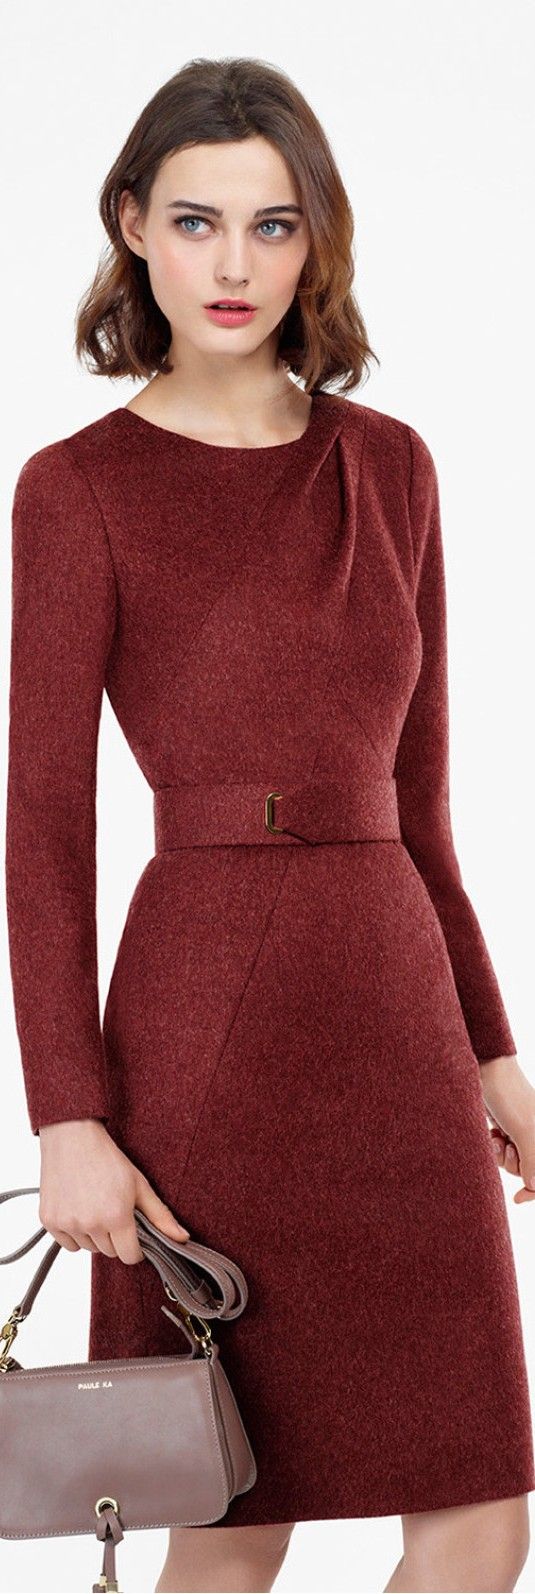 colors that go with maroon midi dress